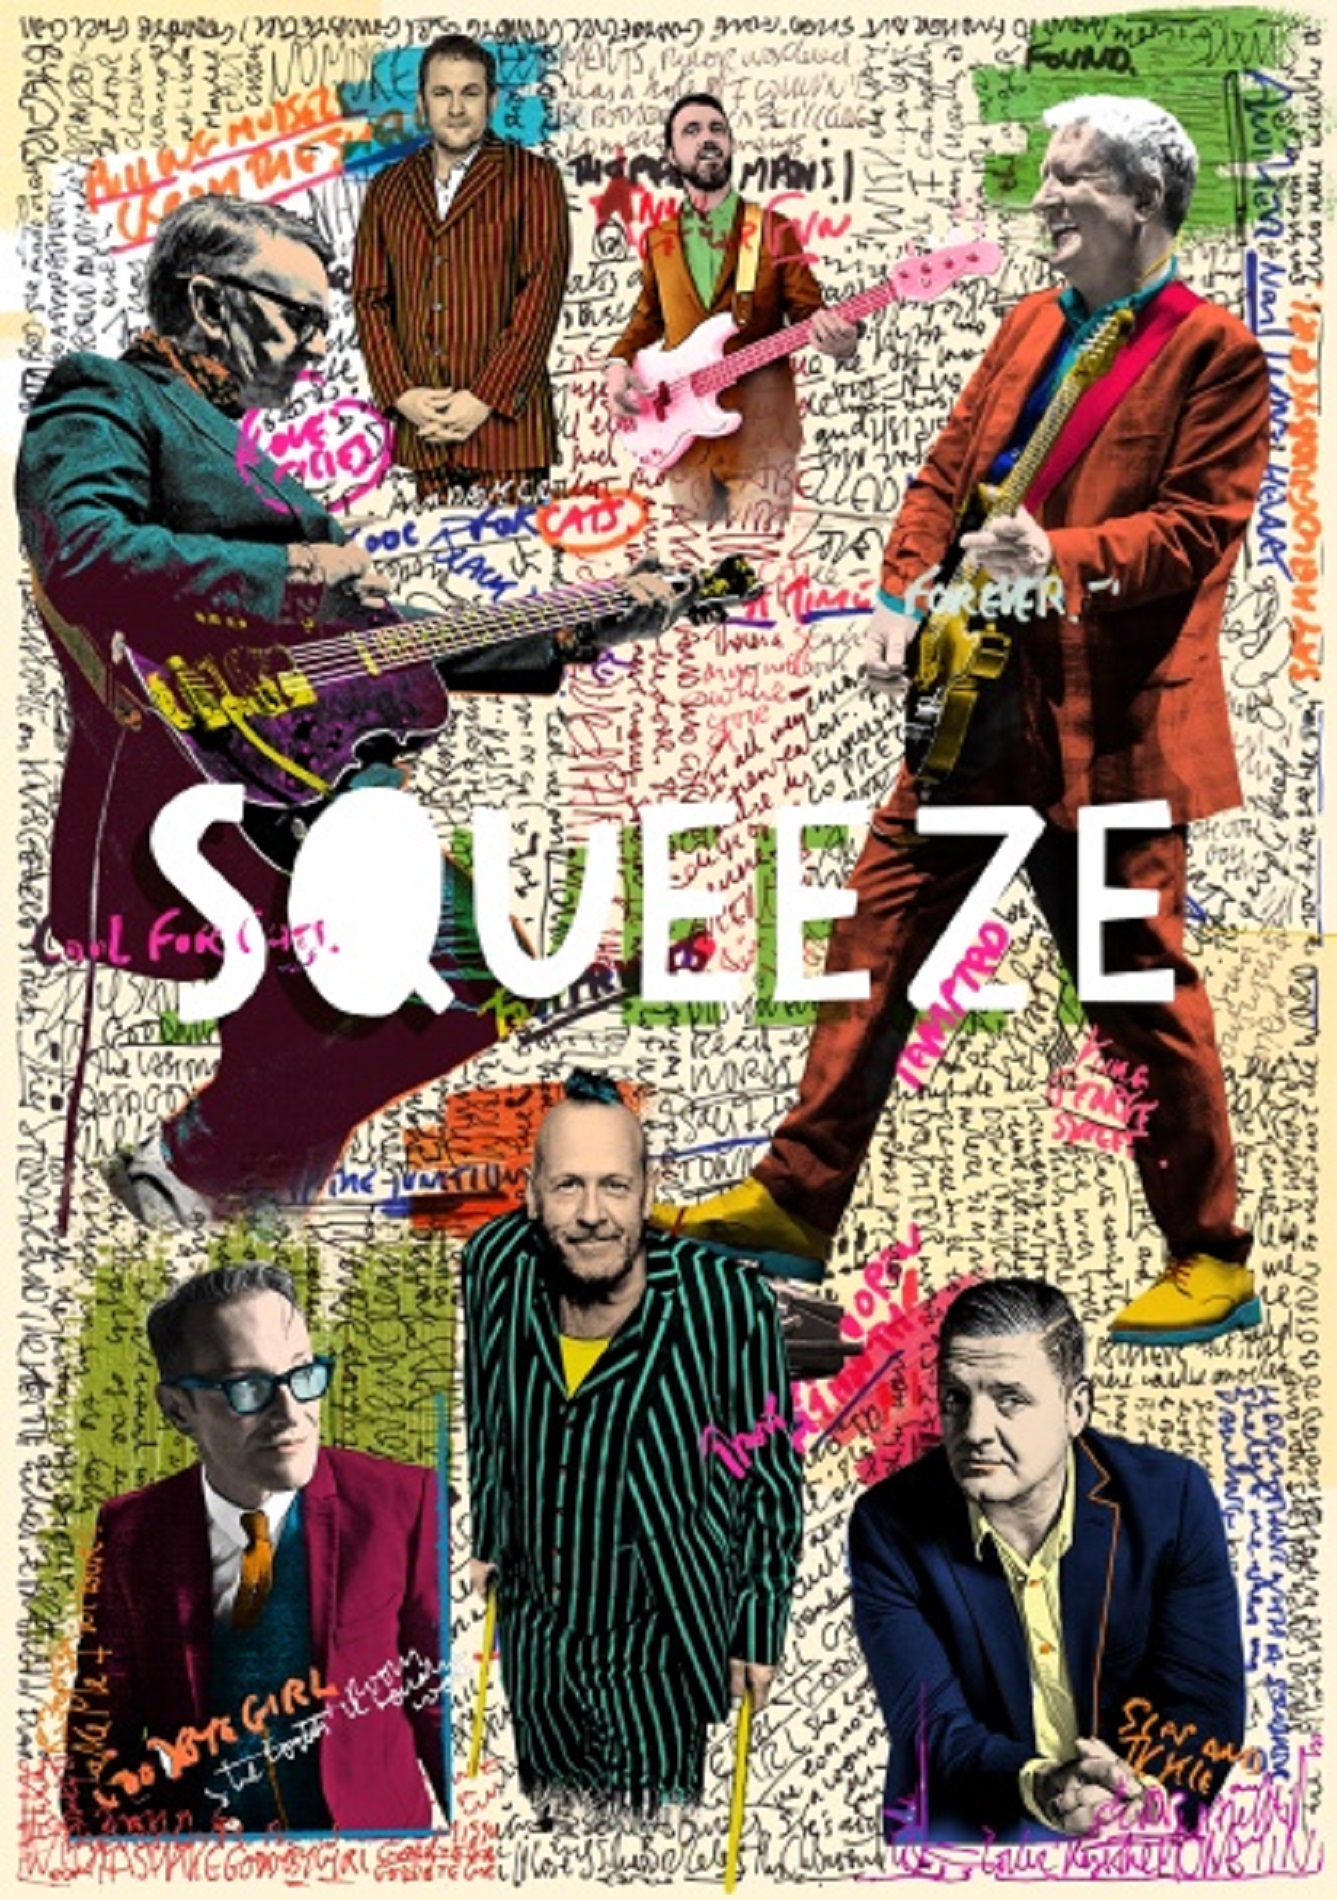 SQUEEZE IS COMING! NOMADBAND Tour Set To Cross The U.S. Grateful Web